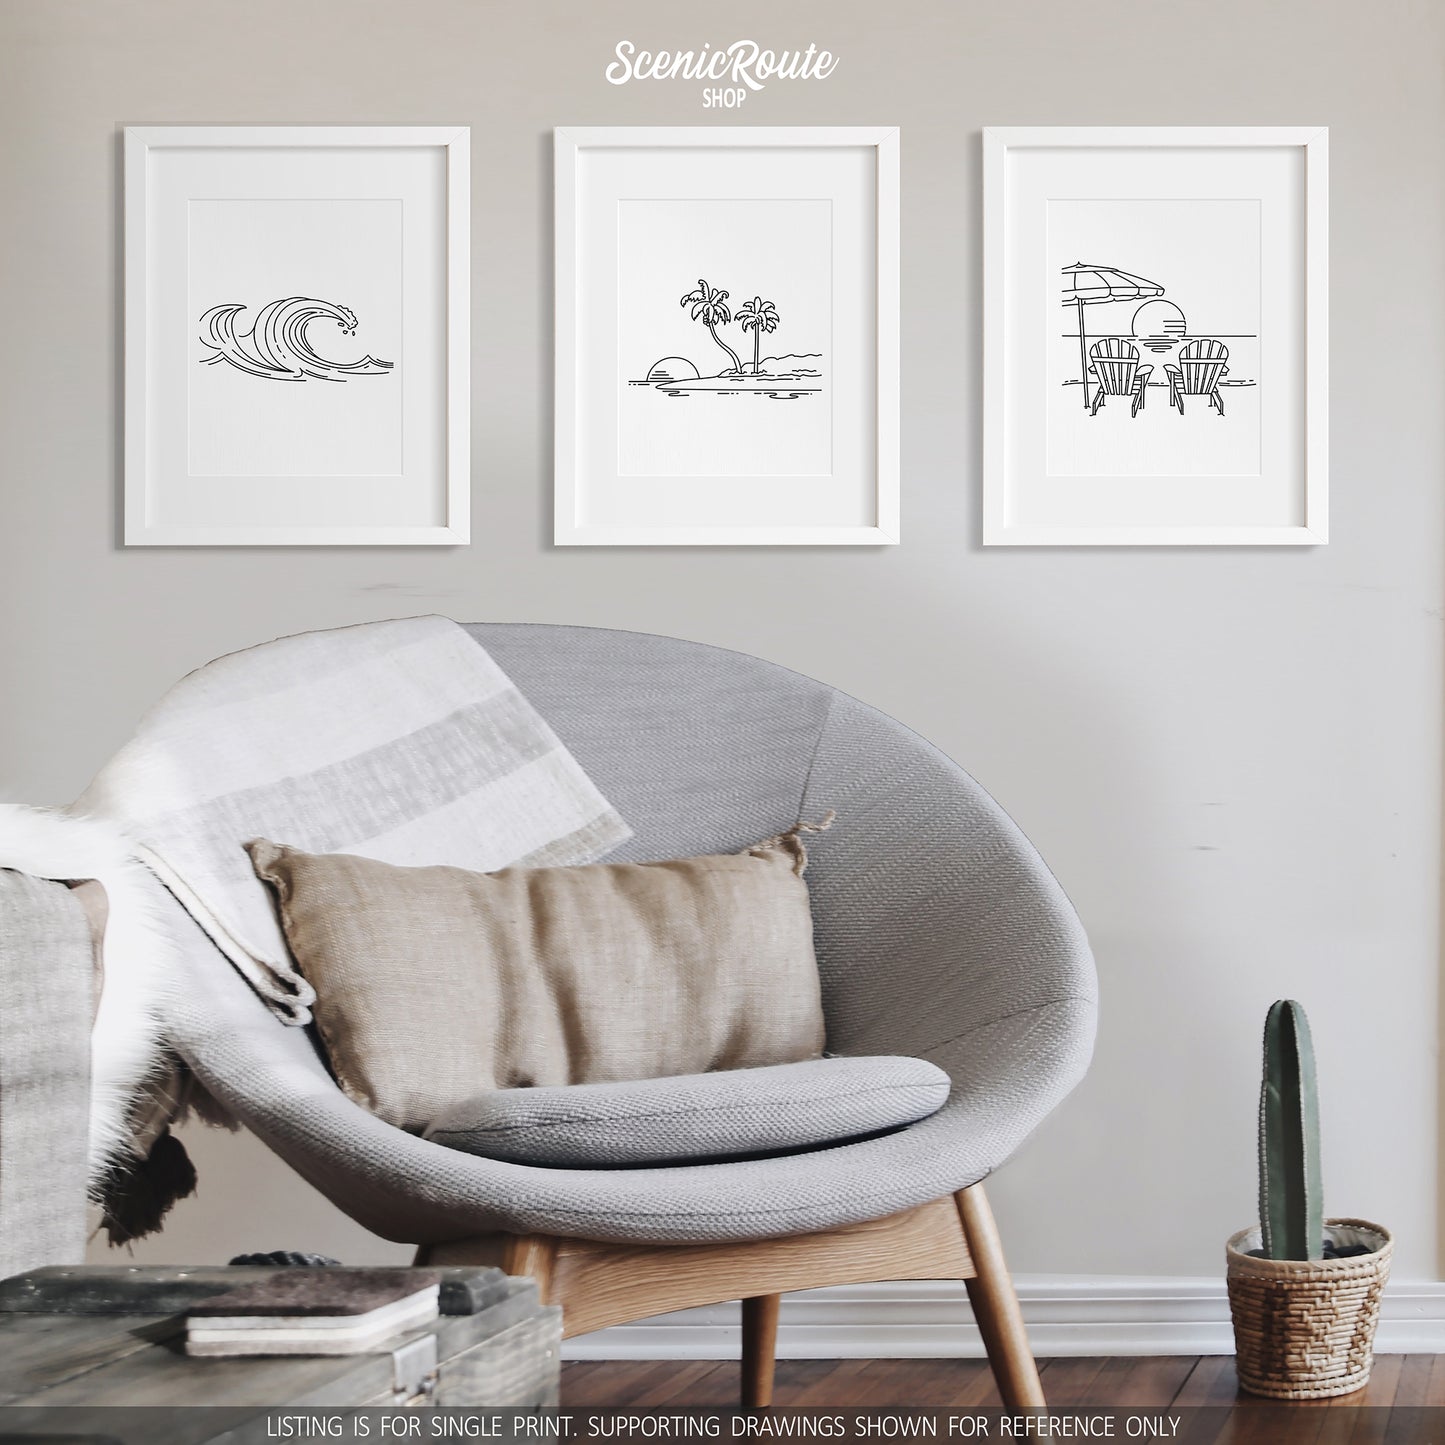 A group of three framed drawings on a white wall above a round chair. The line art drawings include Waves, an Island, and Adirondack Beach Chairs